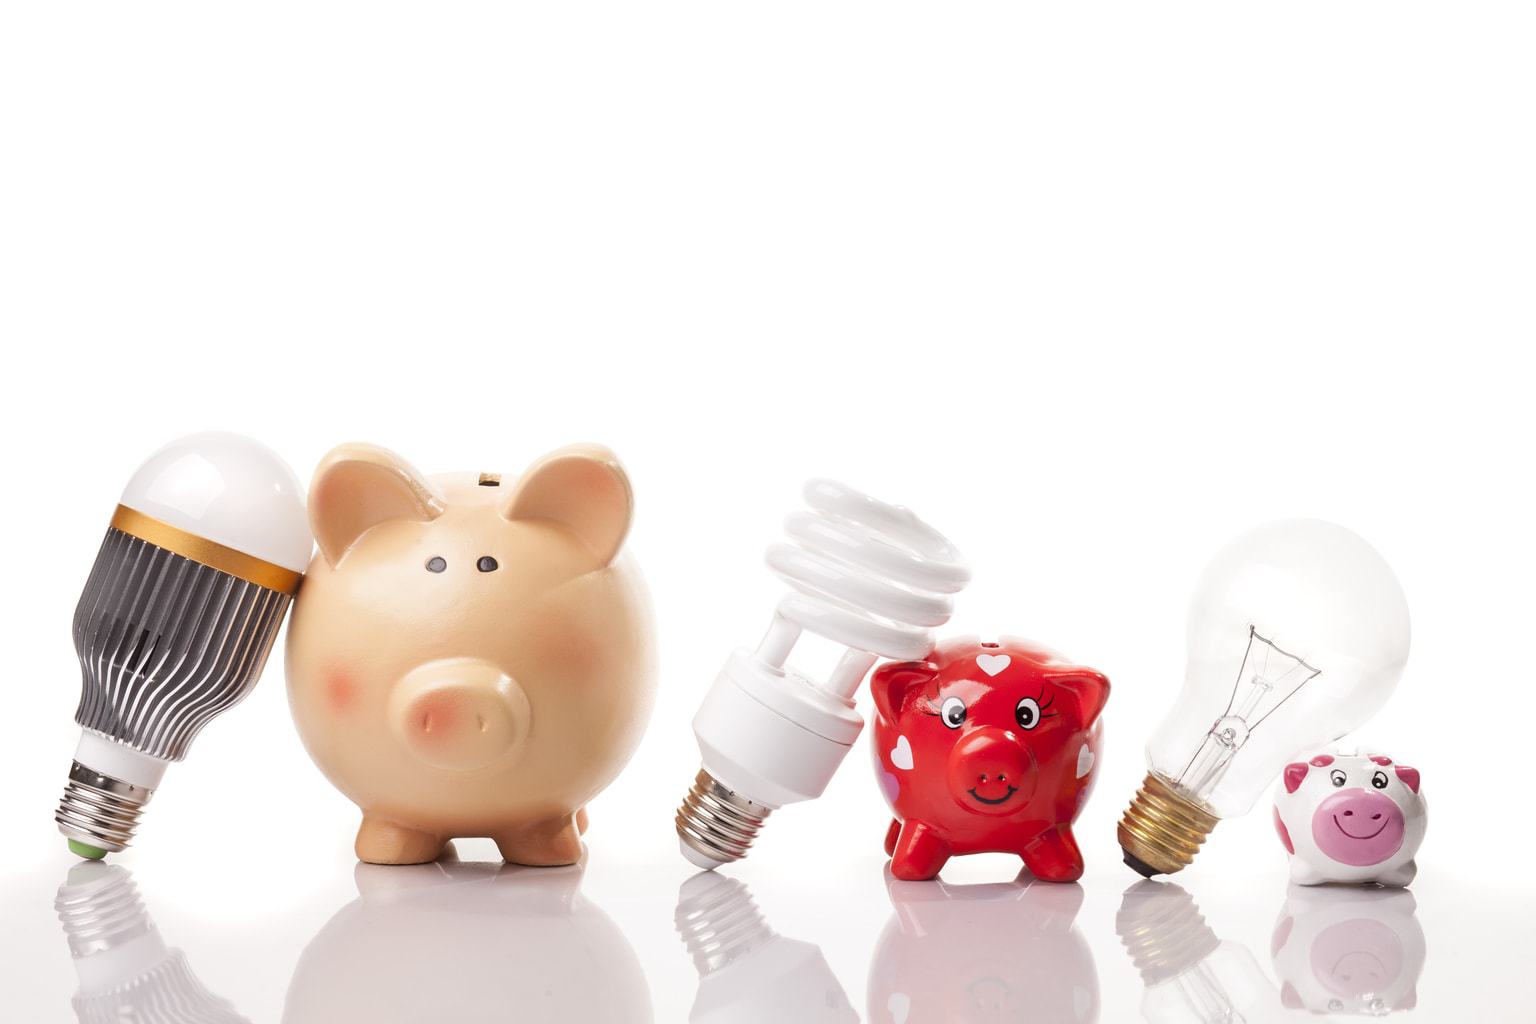 Replace your incandescent bulbs for energy savings